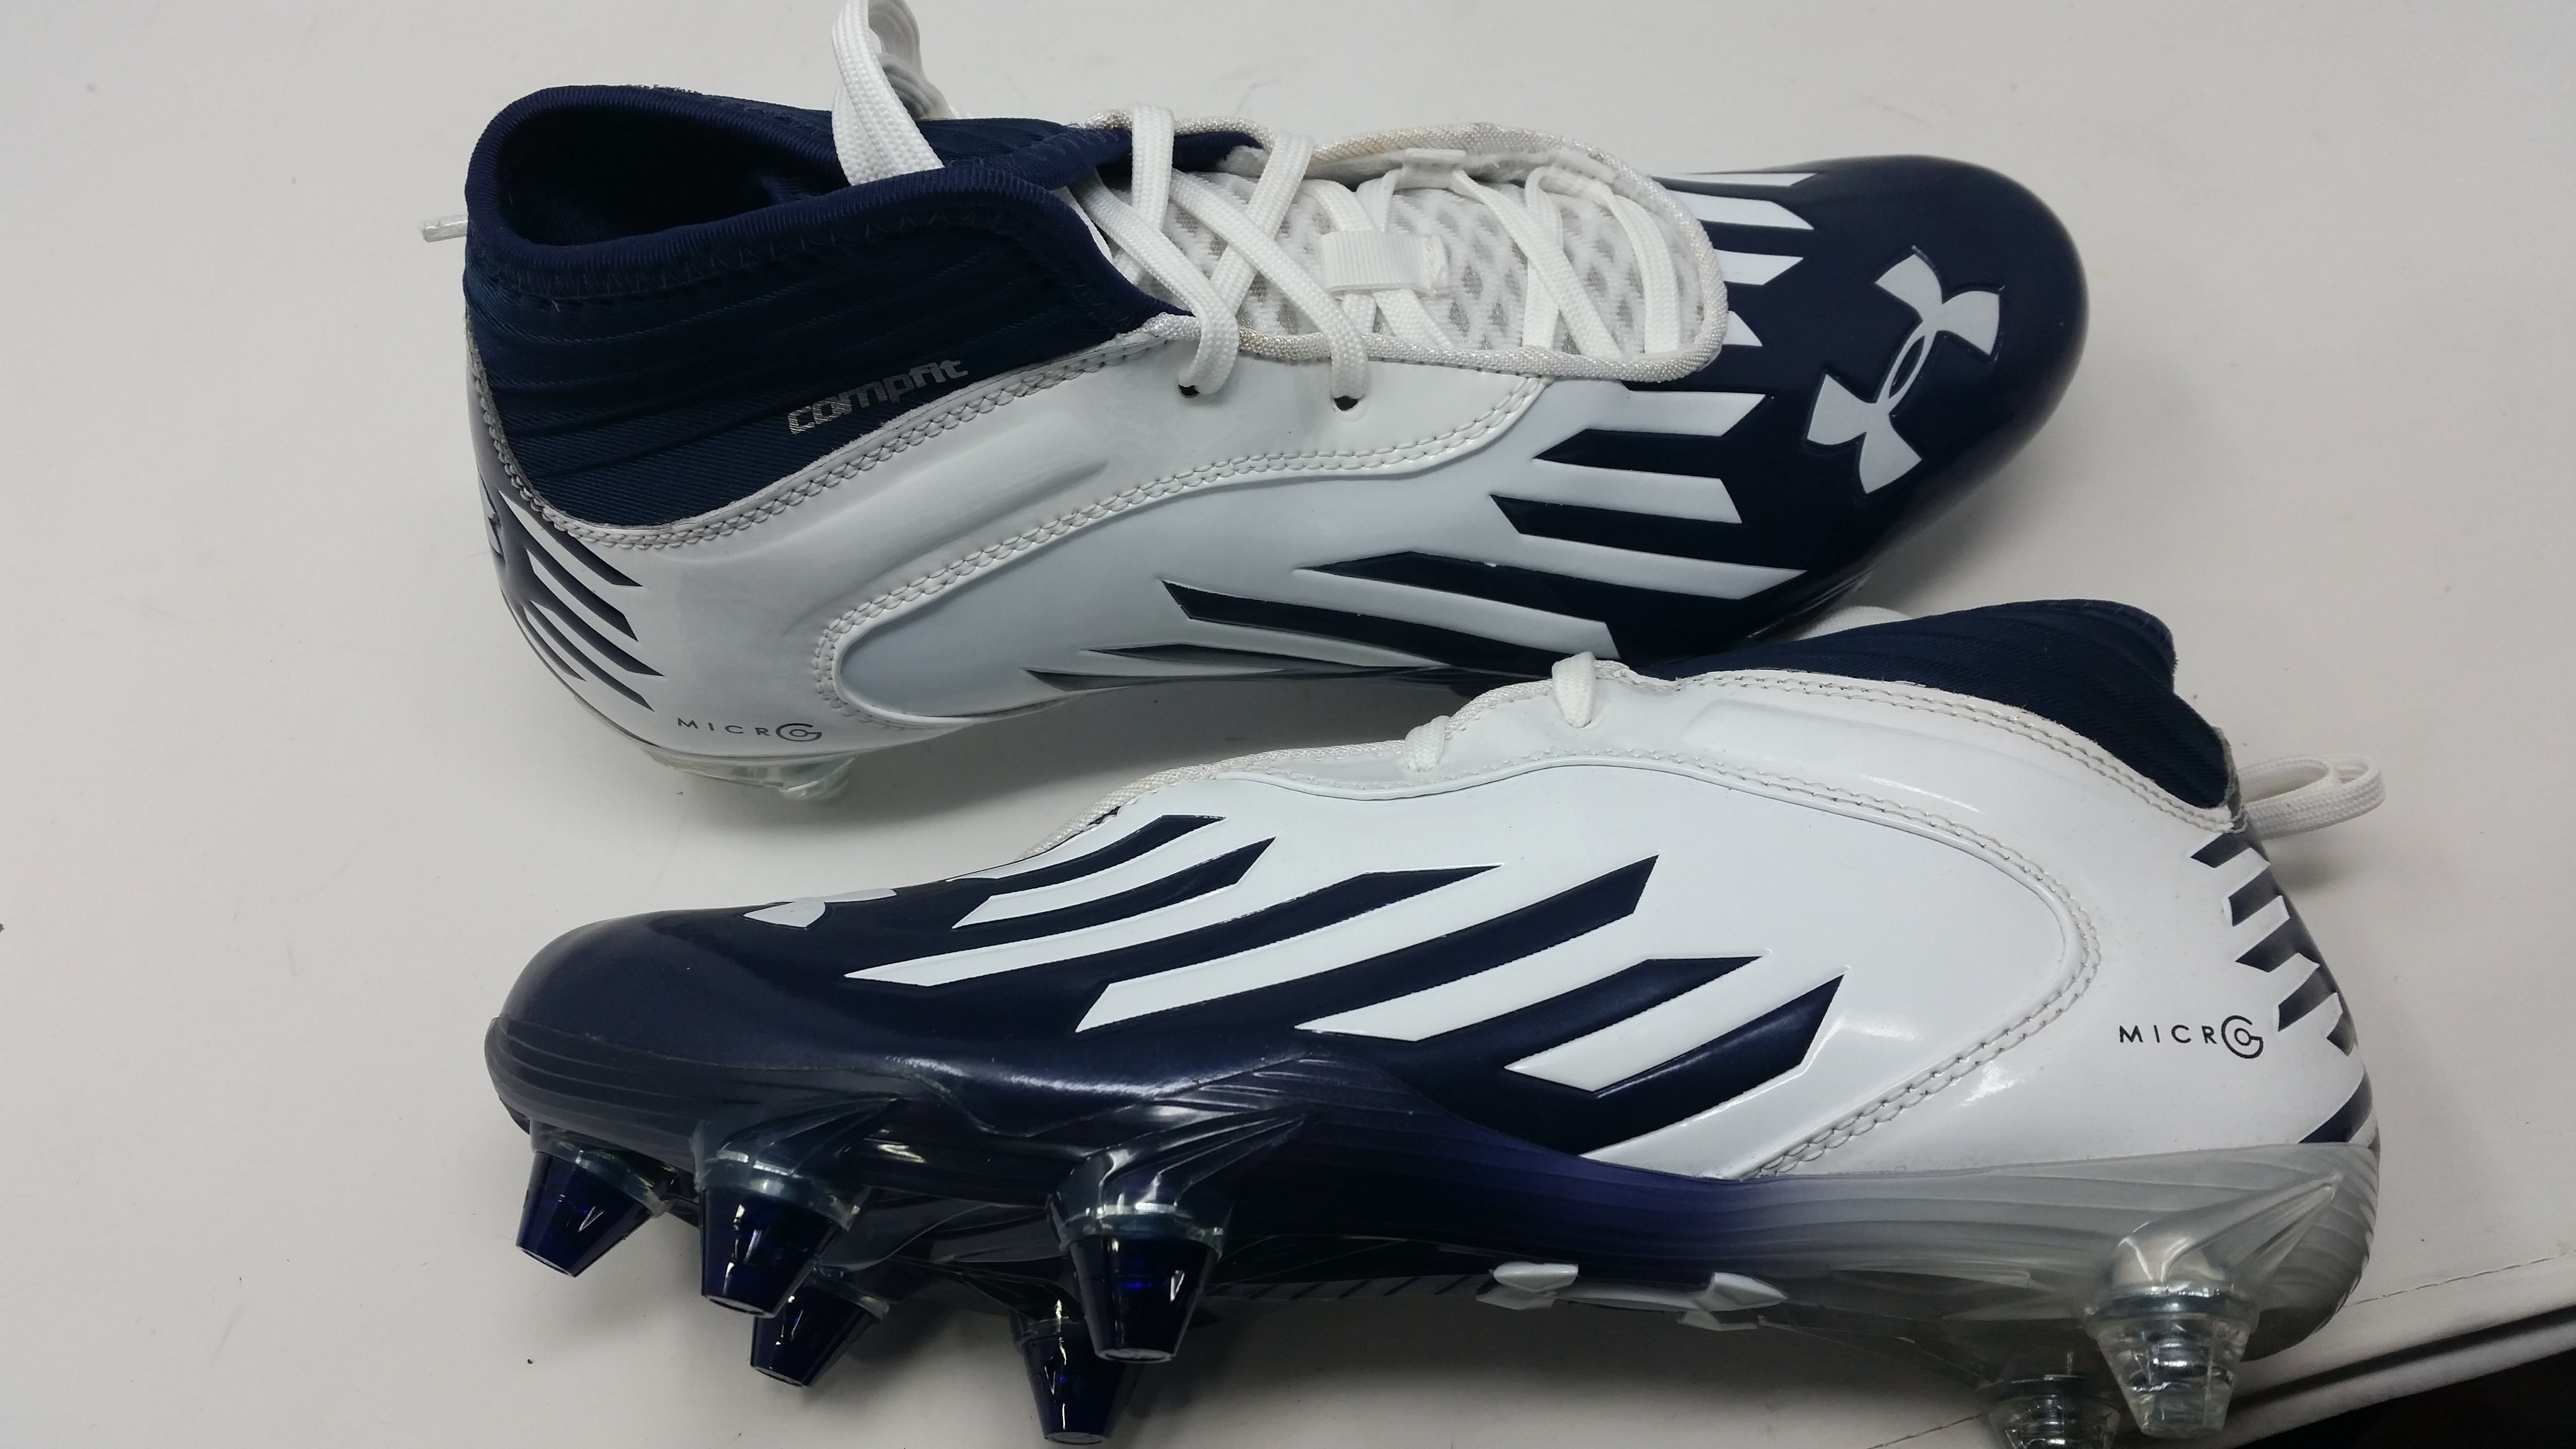 under armour compfit cleats